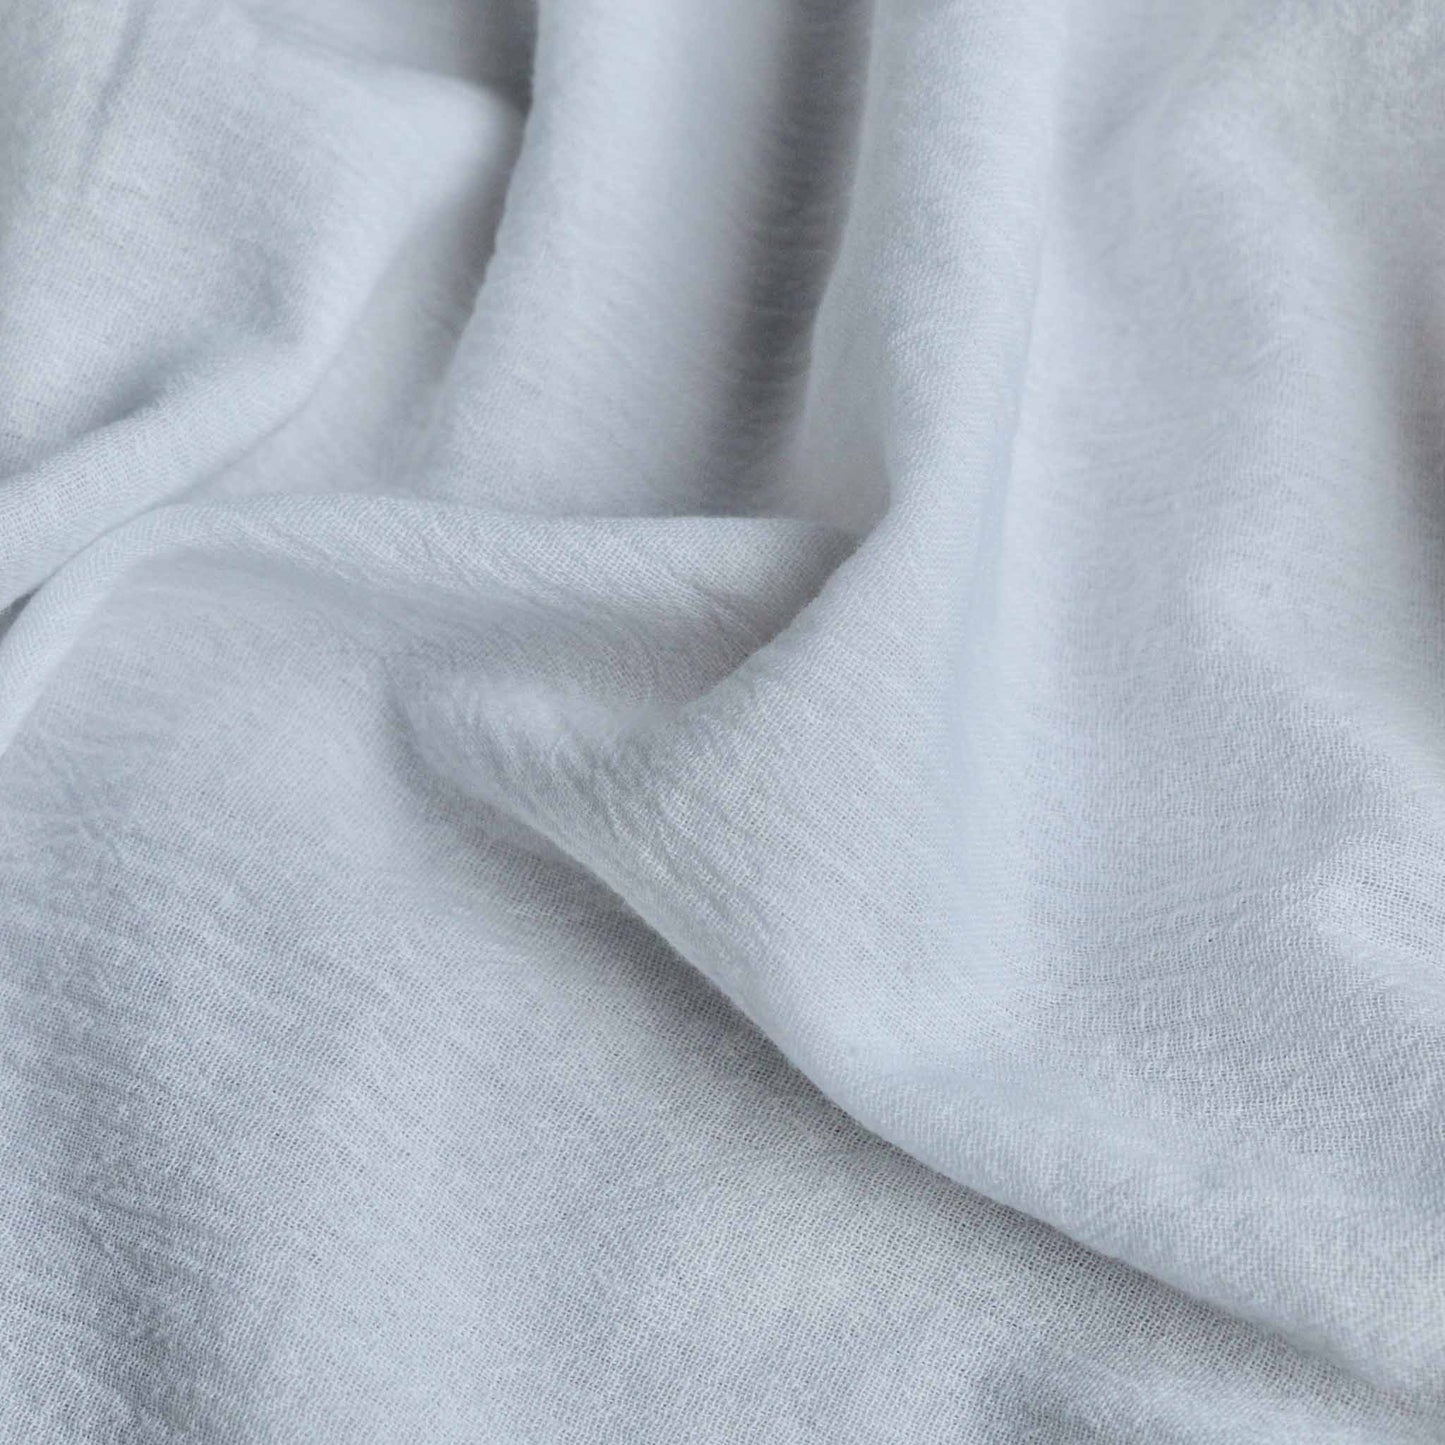 white cotton gauze dressmaking fabric with crinkle effect texture